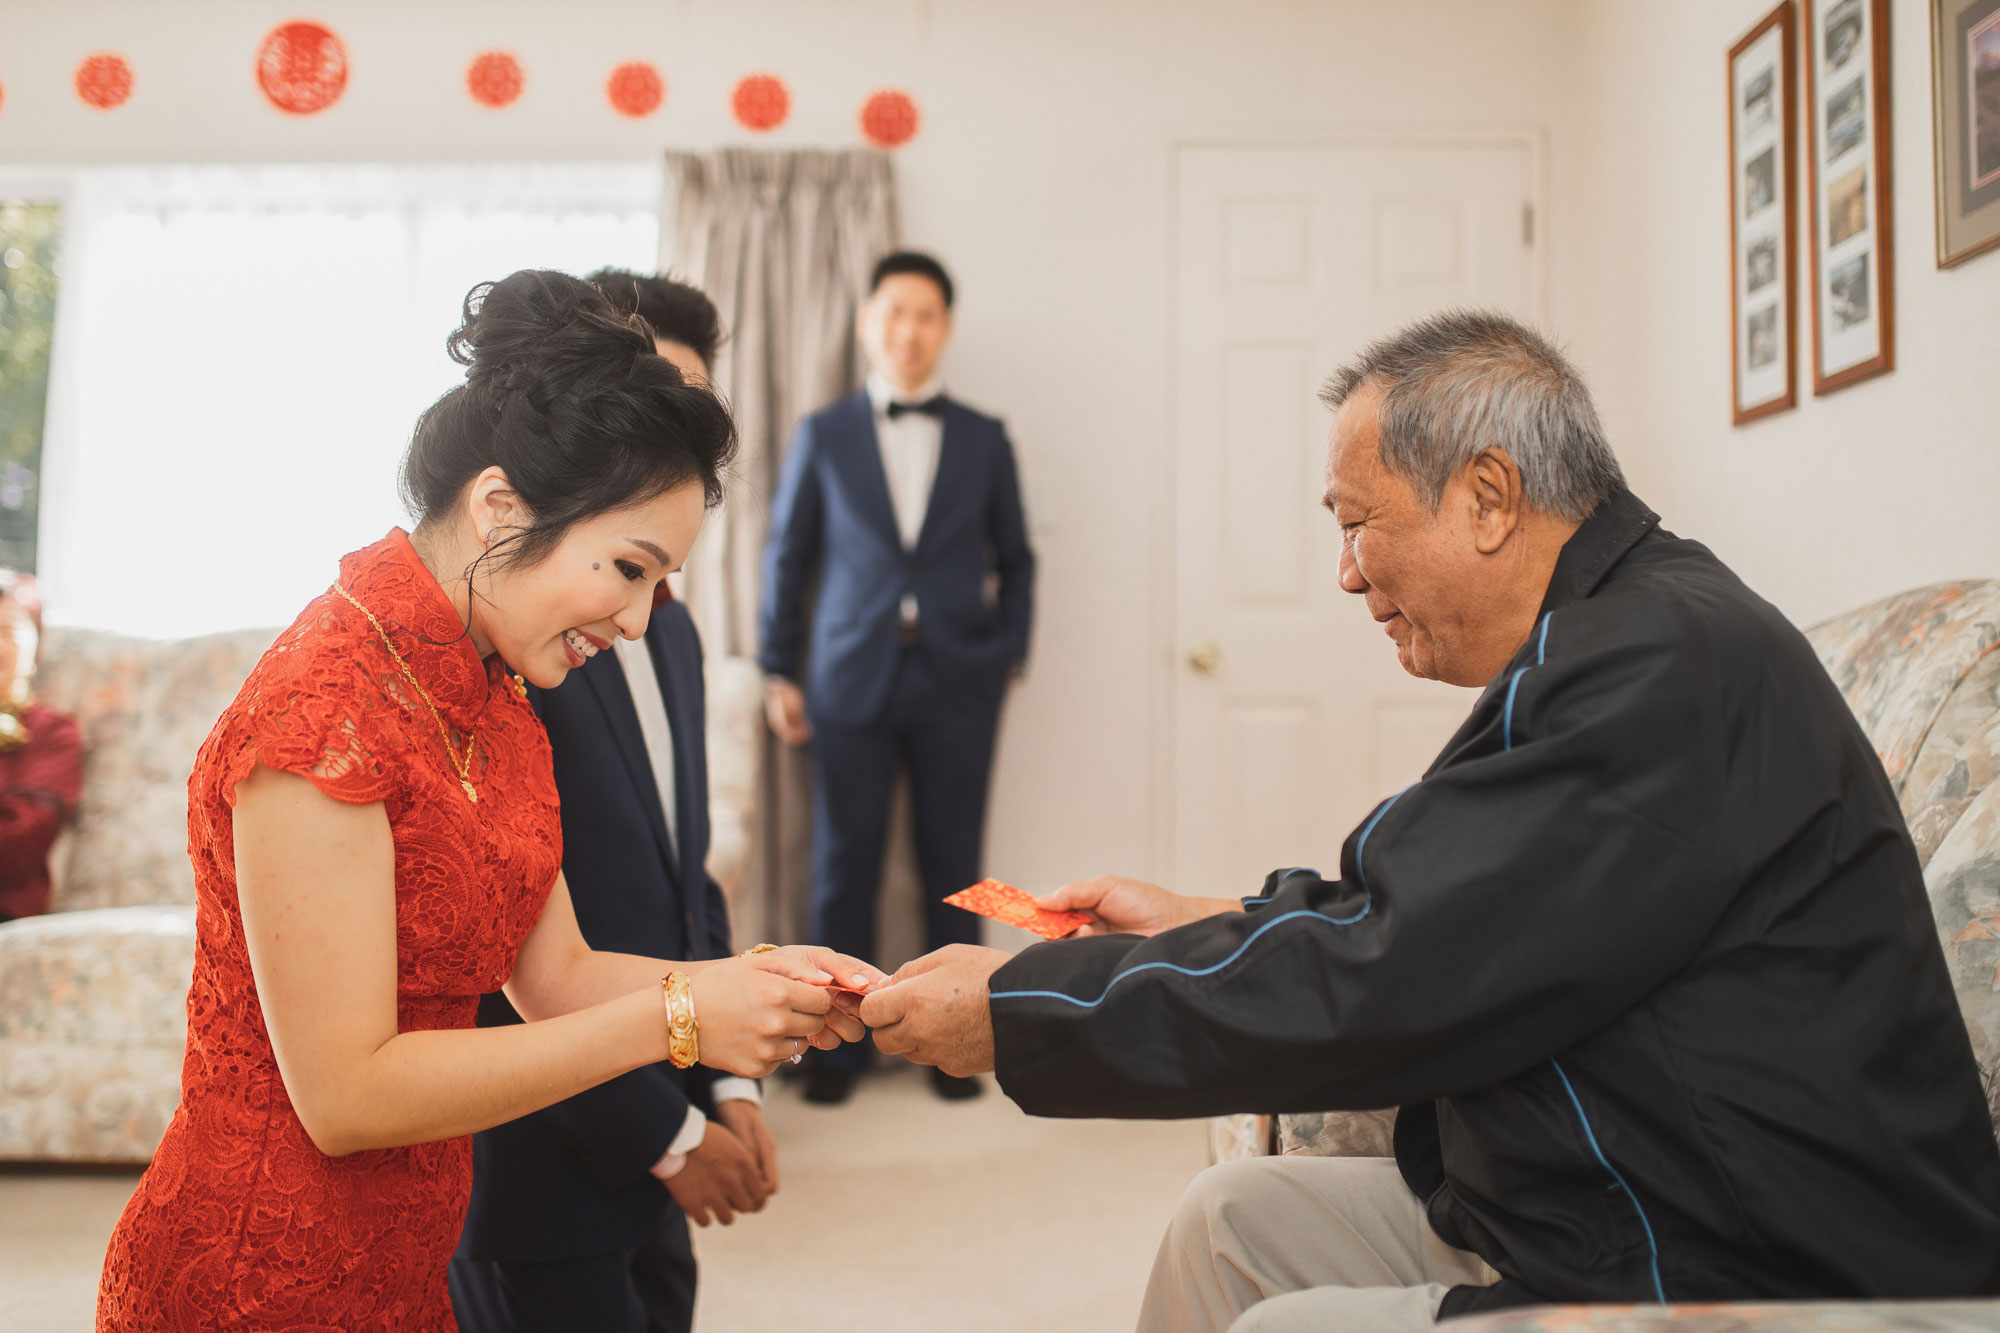 bride receiving red packets on wedding day